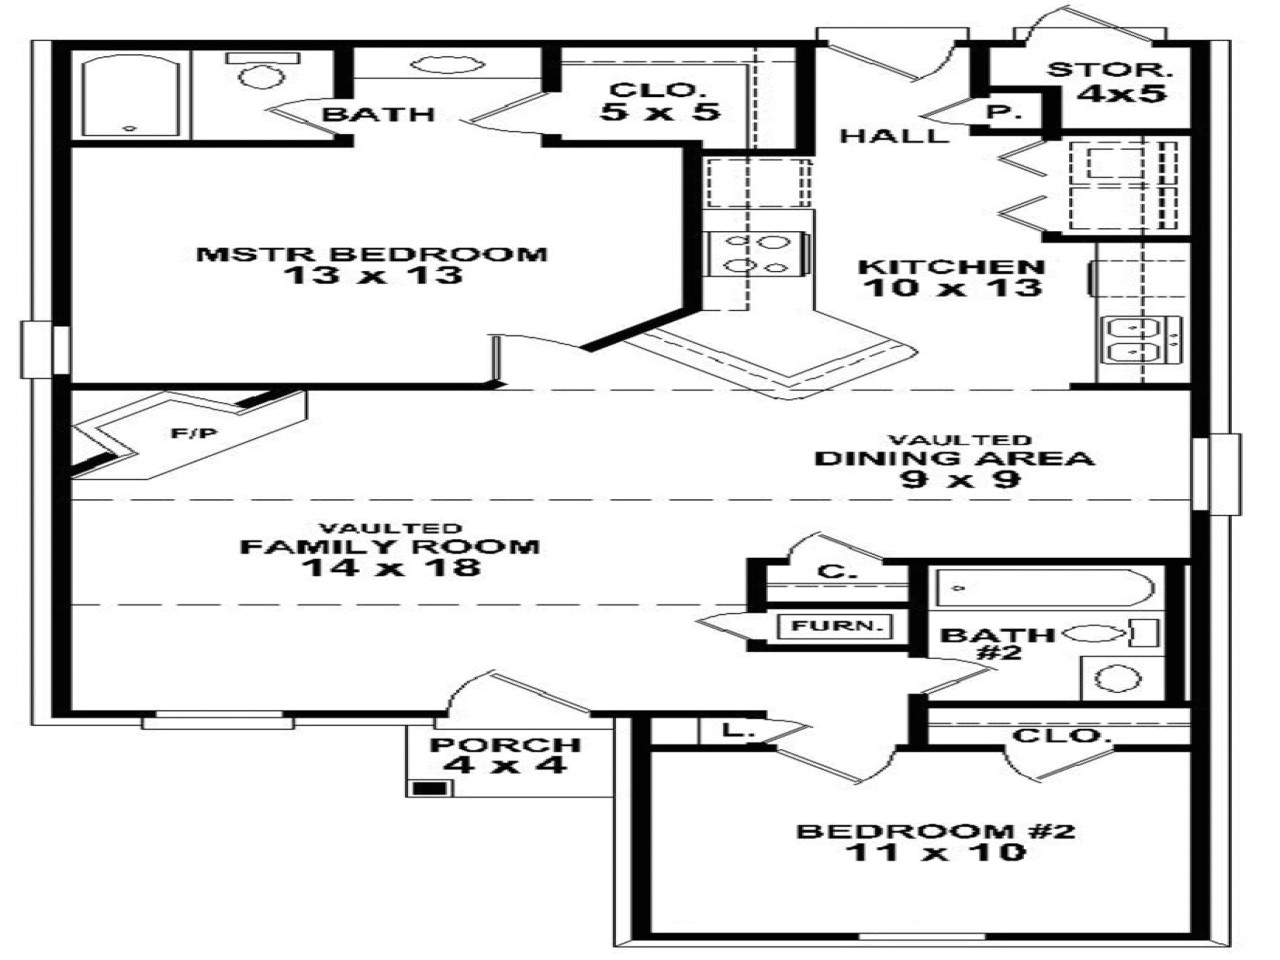 fc8595421f7cf2b6 simple 2 bedroom house floor plans small two bedroom house plans